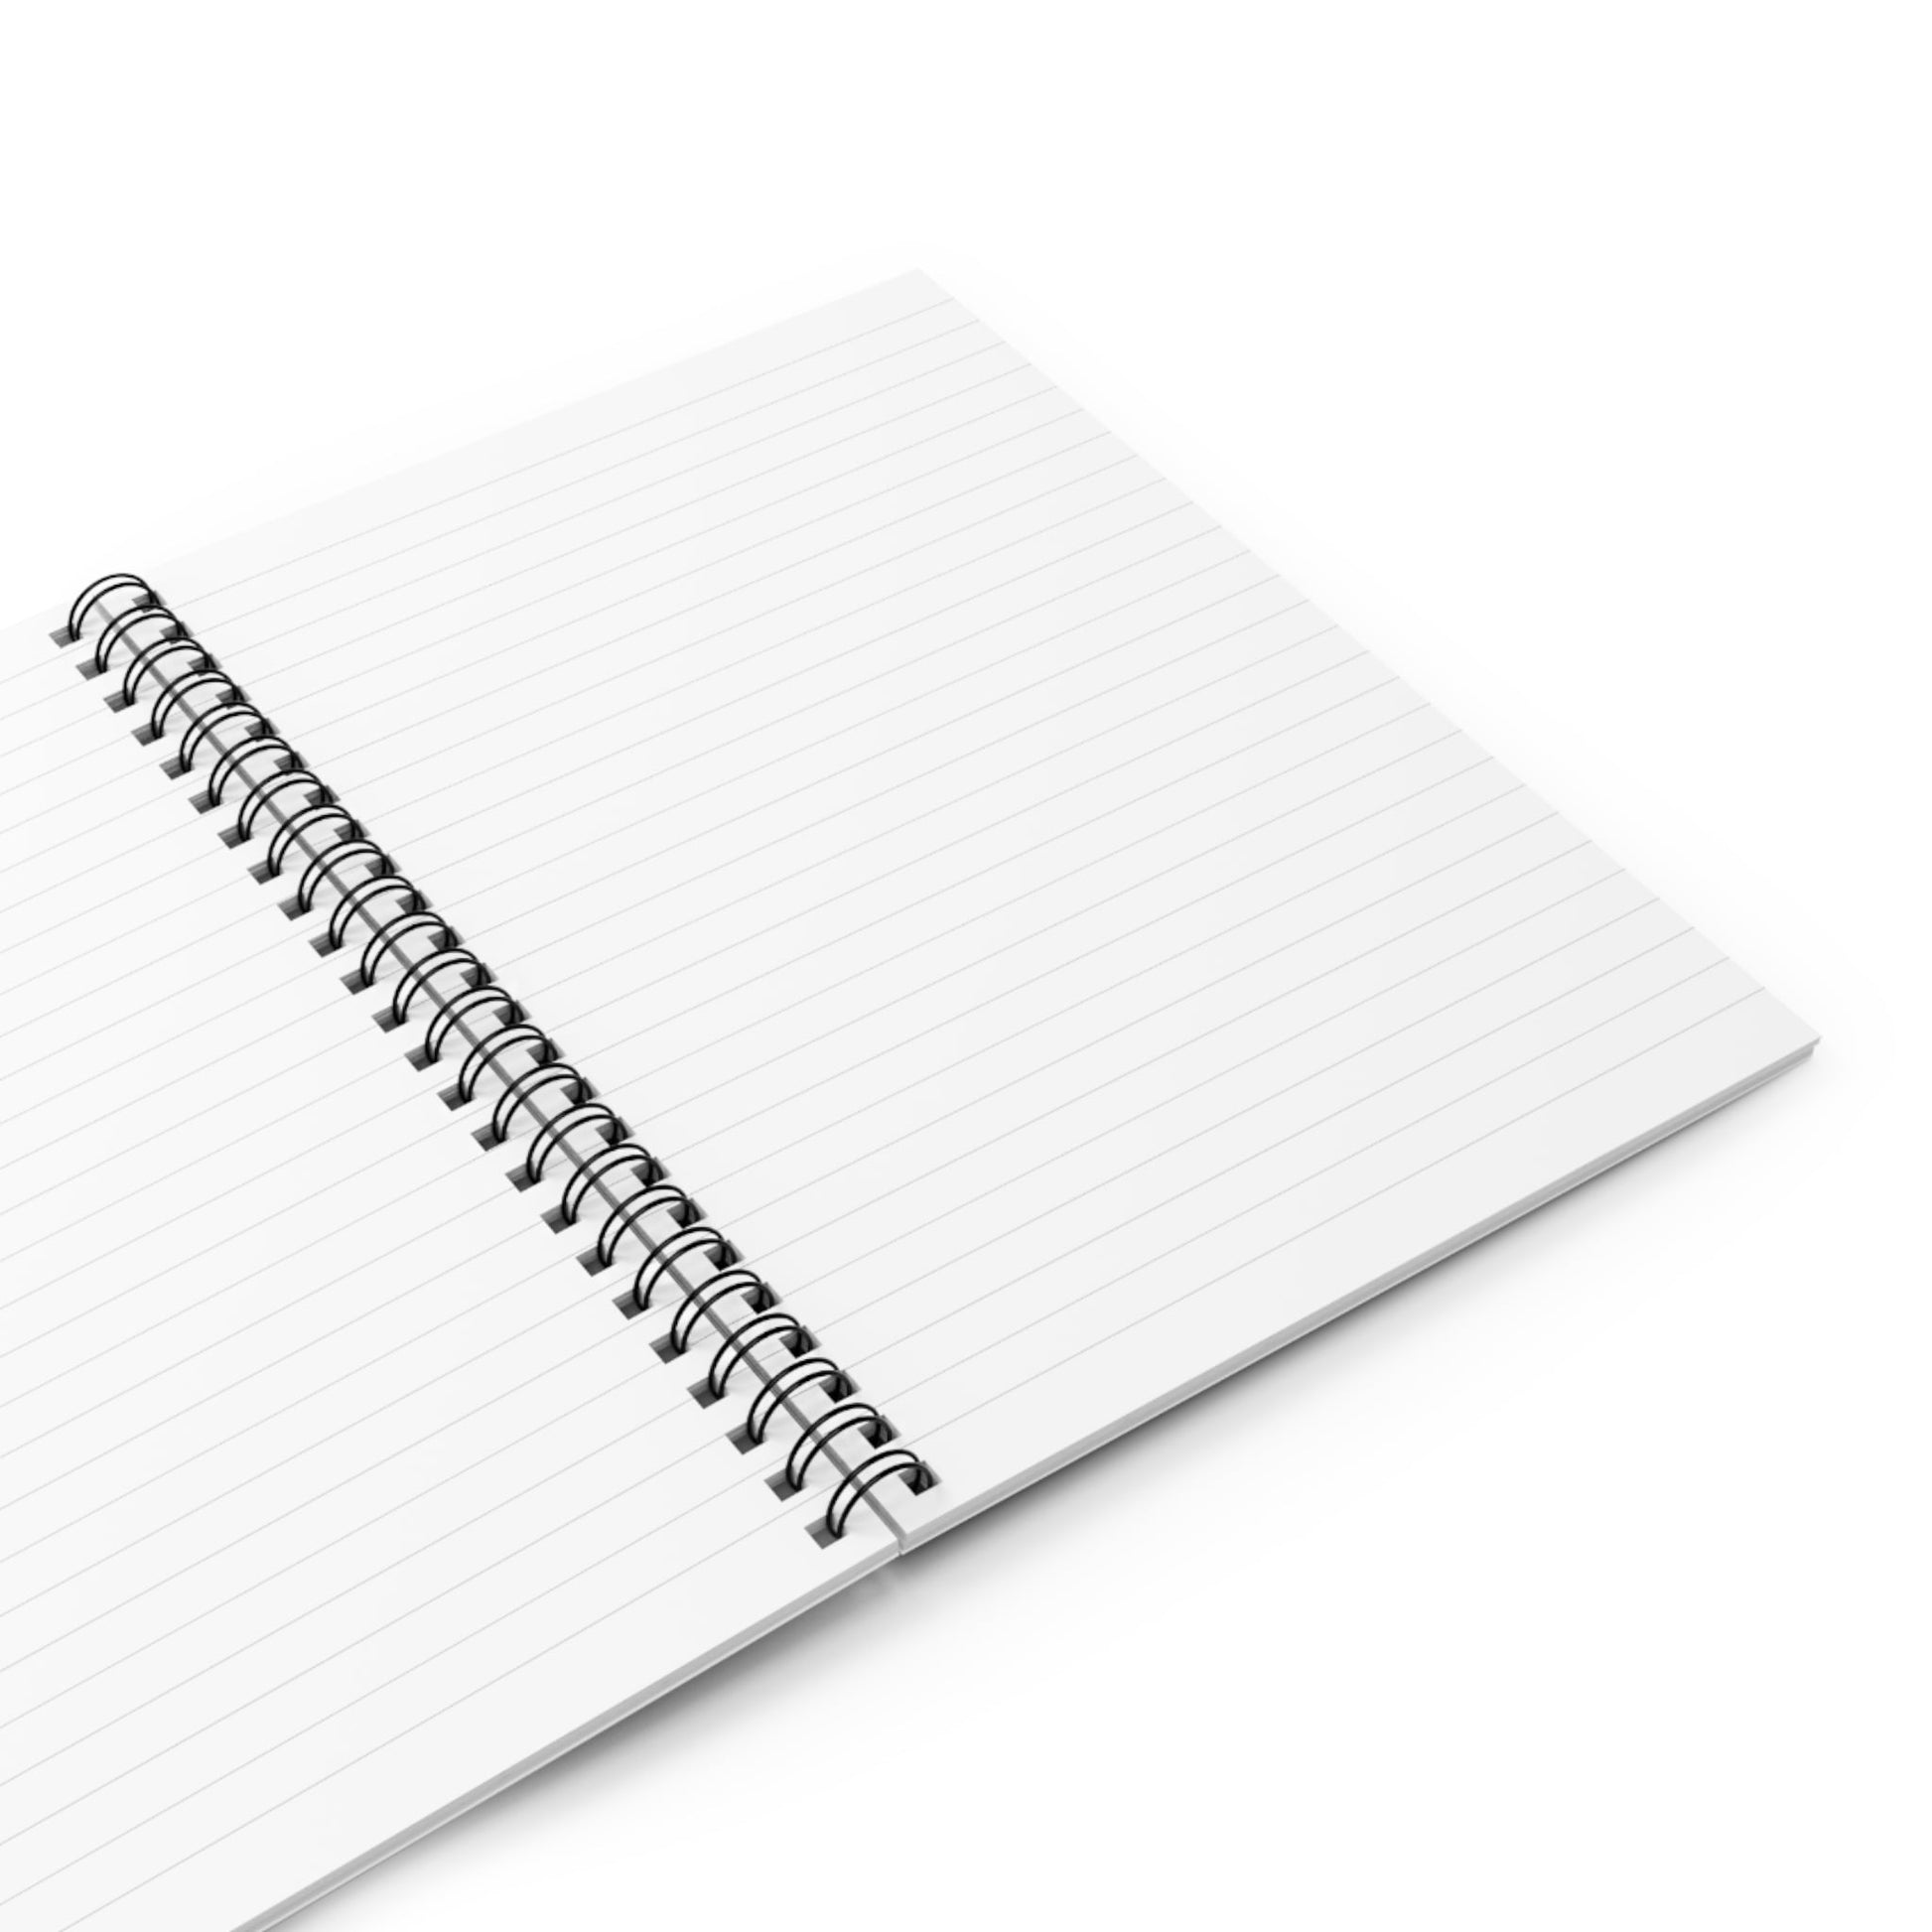 Spiral Notebook with Depressed Cover Opened with Blank White College Ruled Pages